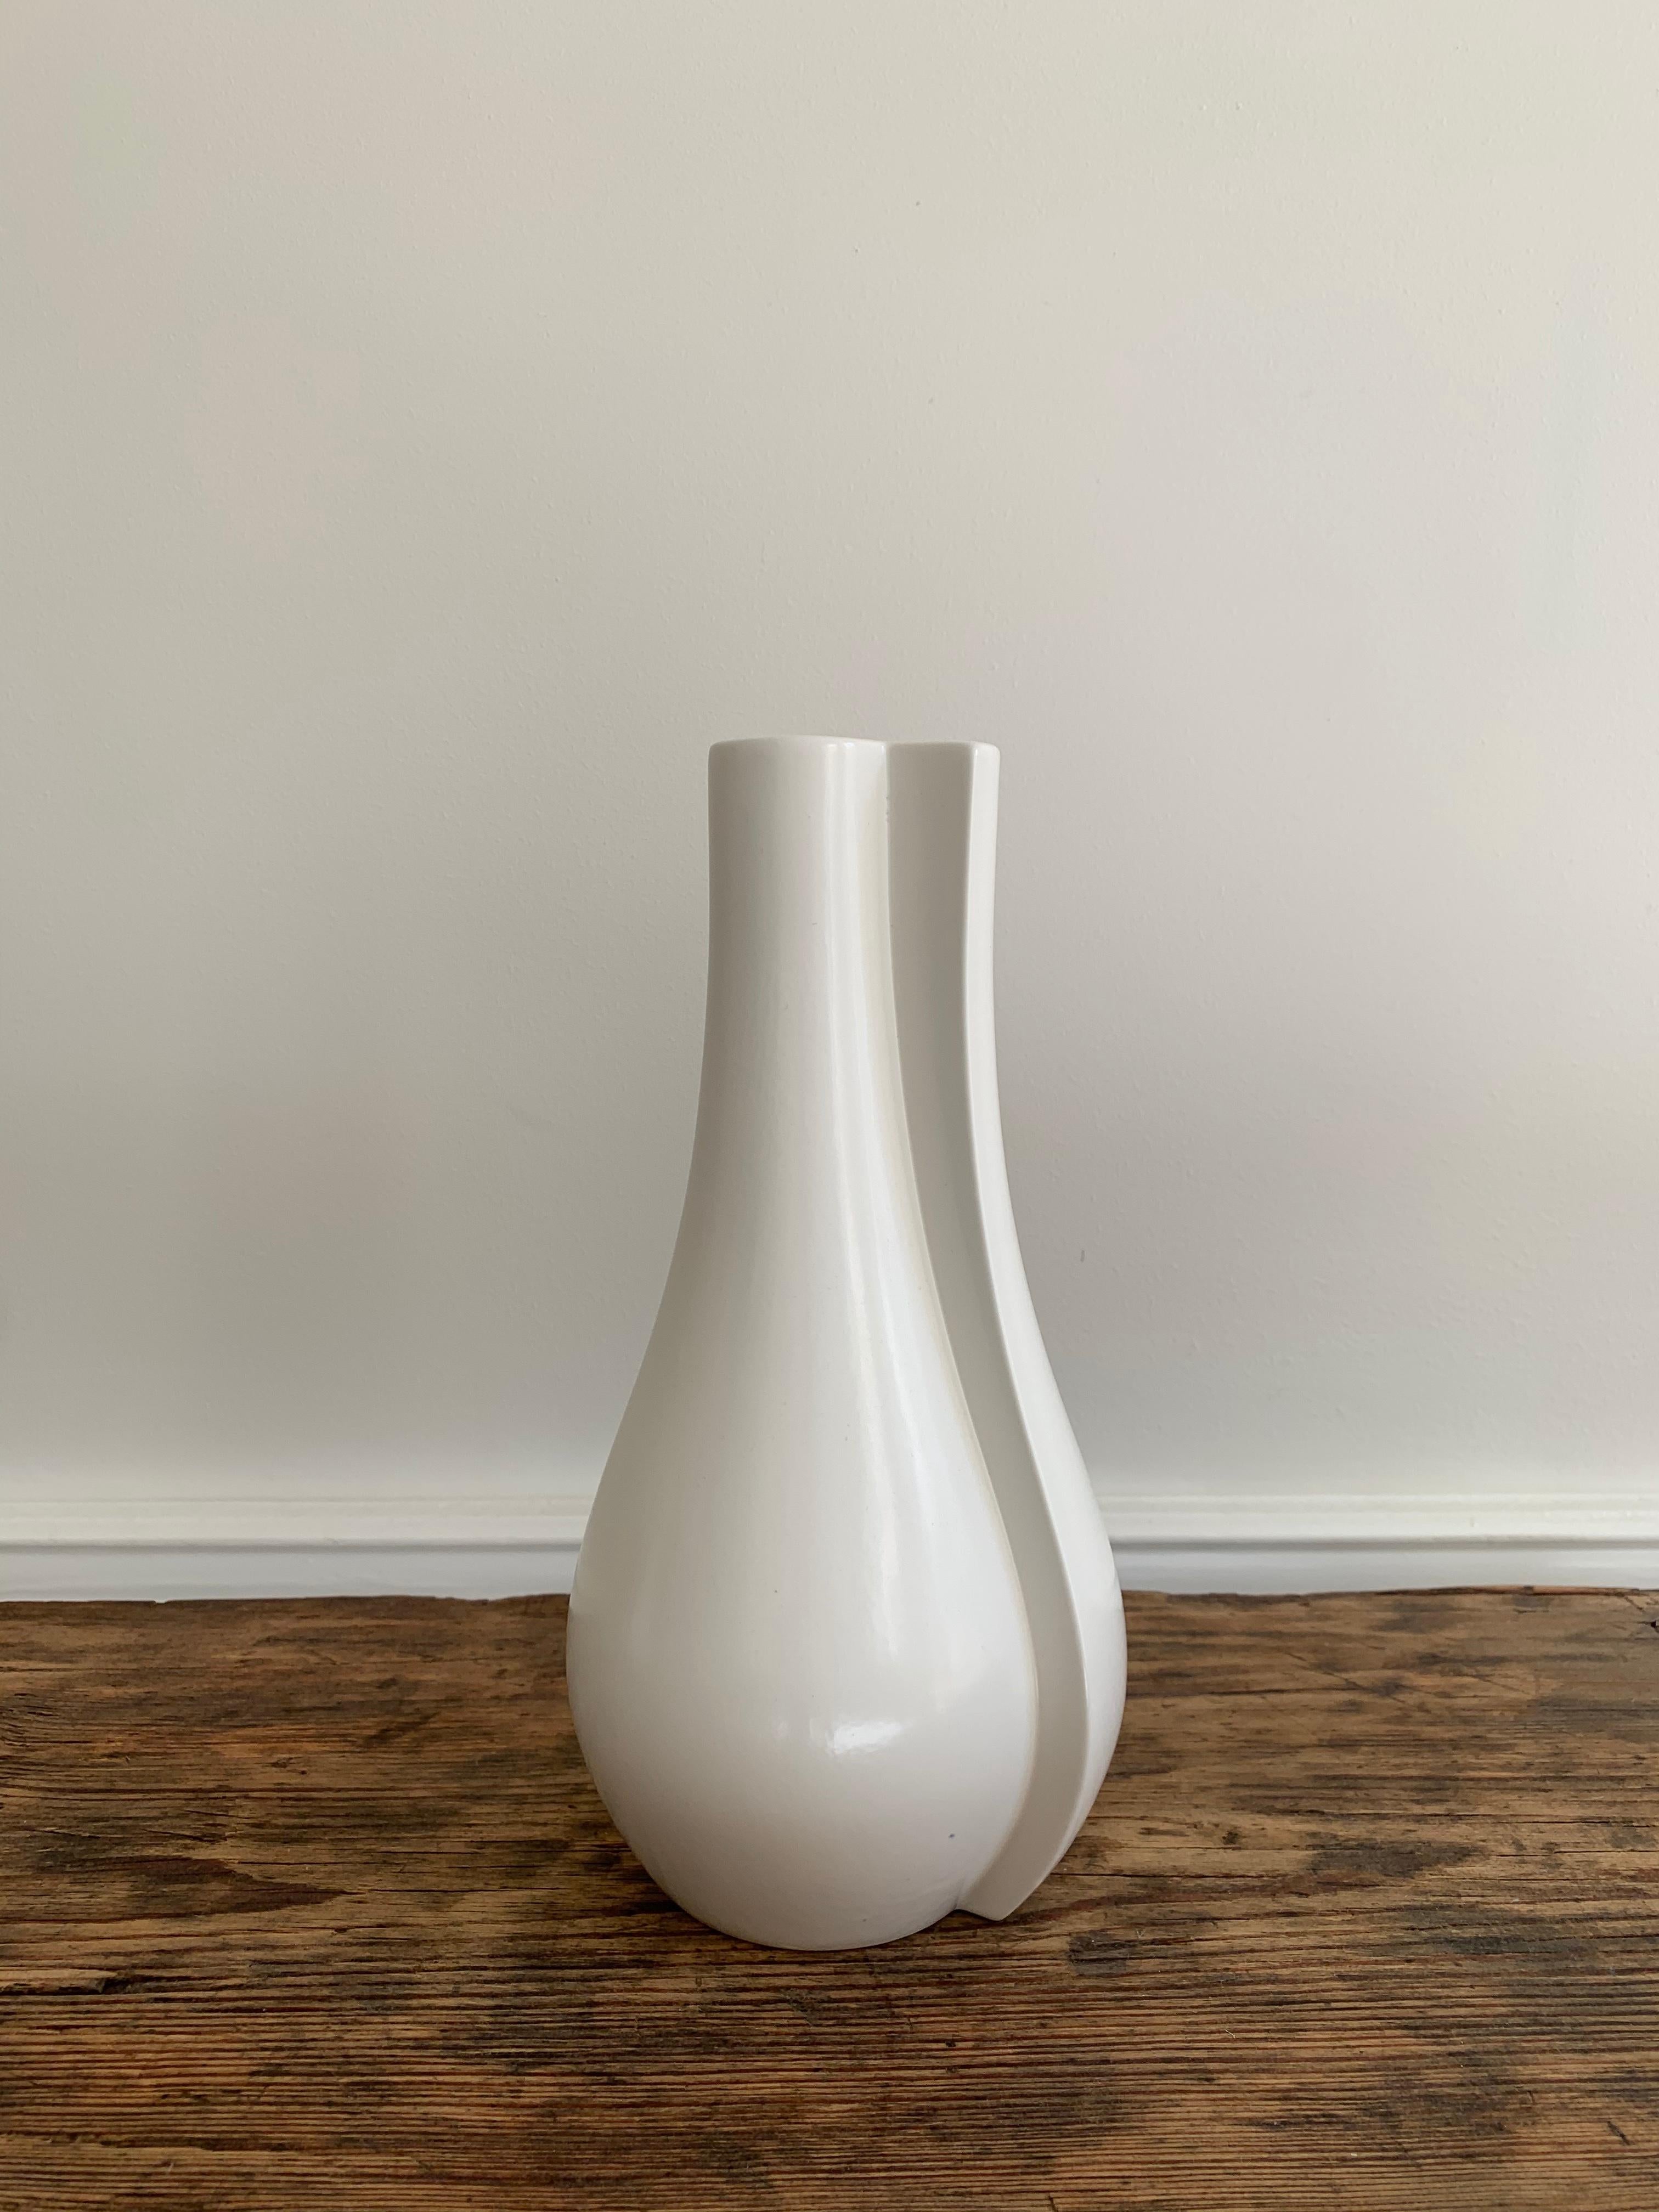 Rare and iconic Surrea vase by Wilhelm Kåge for Gustavsberg made in the 1940s. In good vintage condition.